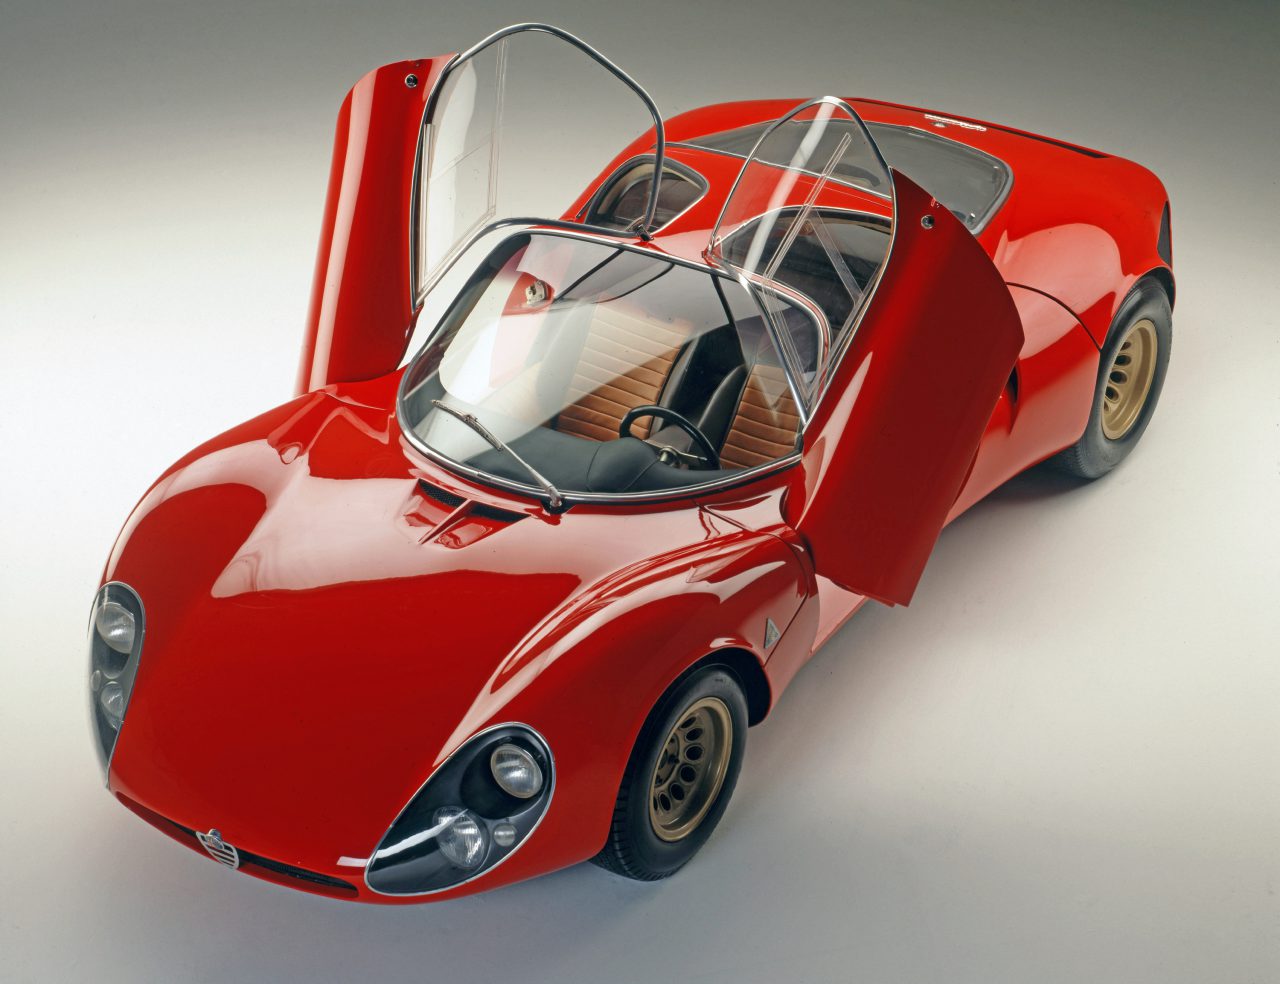 Alfa Romeo 33 Stradale, Question of the Day: Is the Alfa Romeo 33 Stradale the most beautiful car ever built?, ClassicCars.com Journal